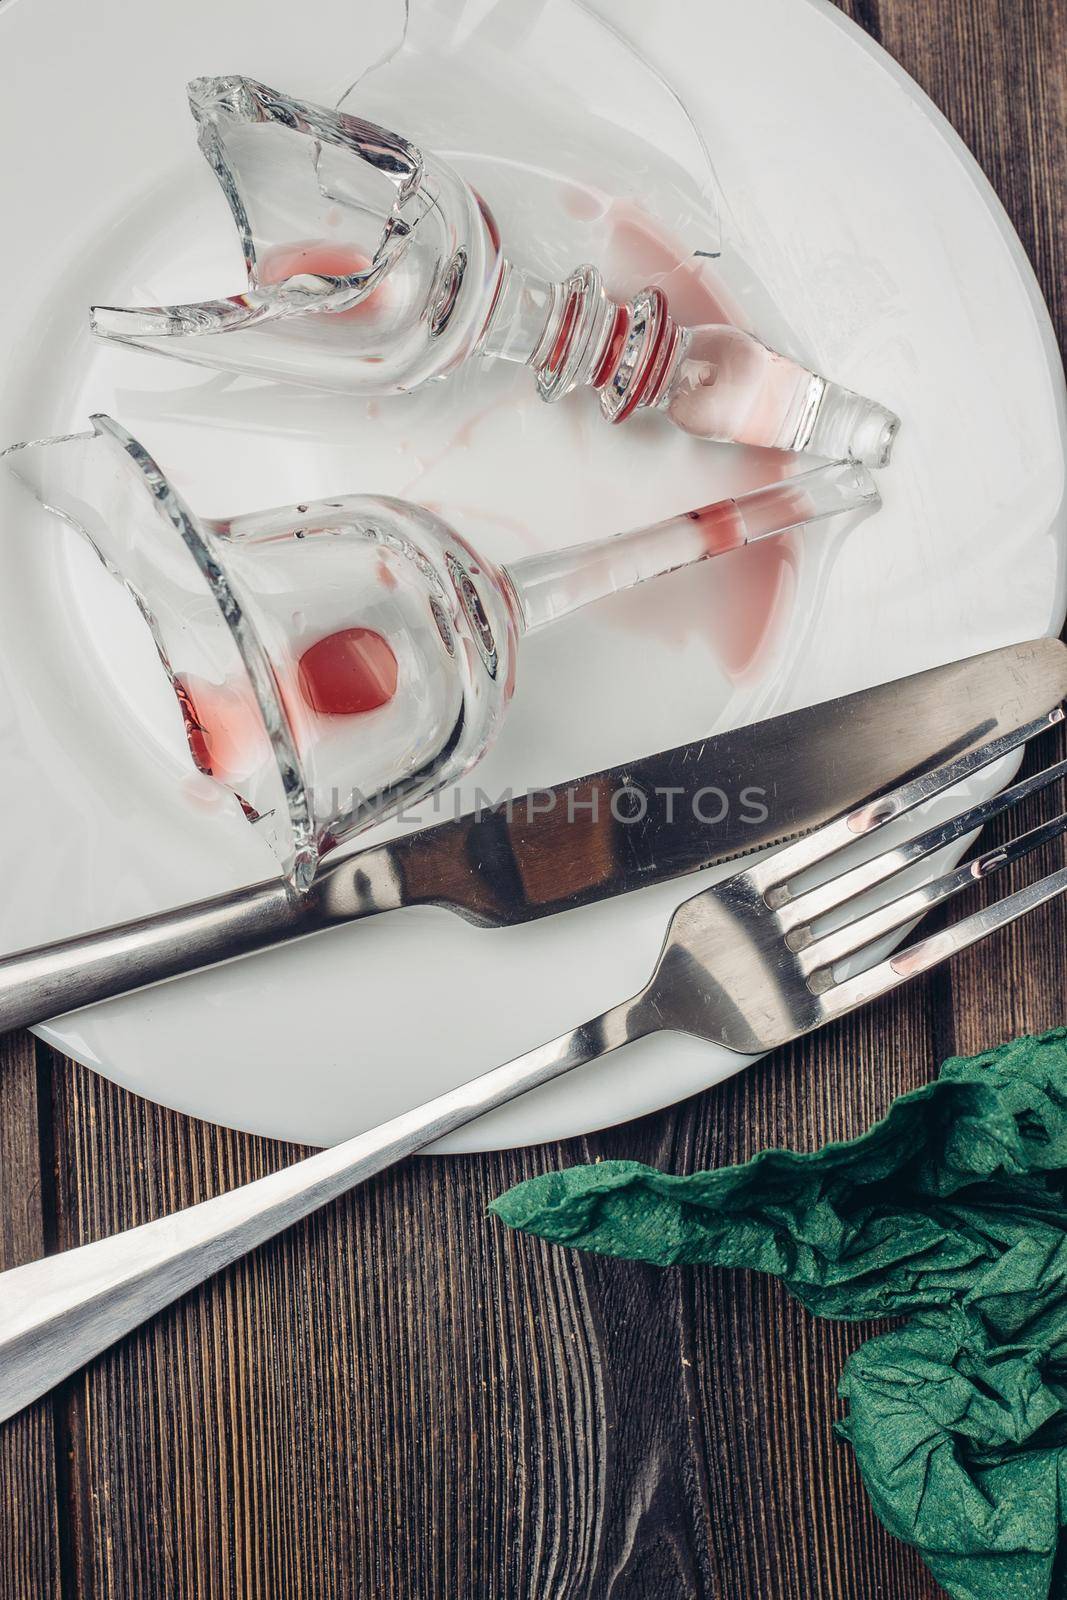 broken glass on plates kitchenware table setting tableware. High quality photo